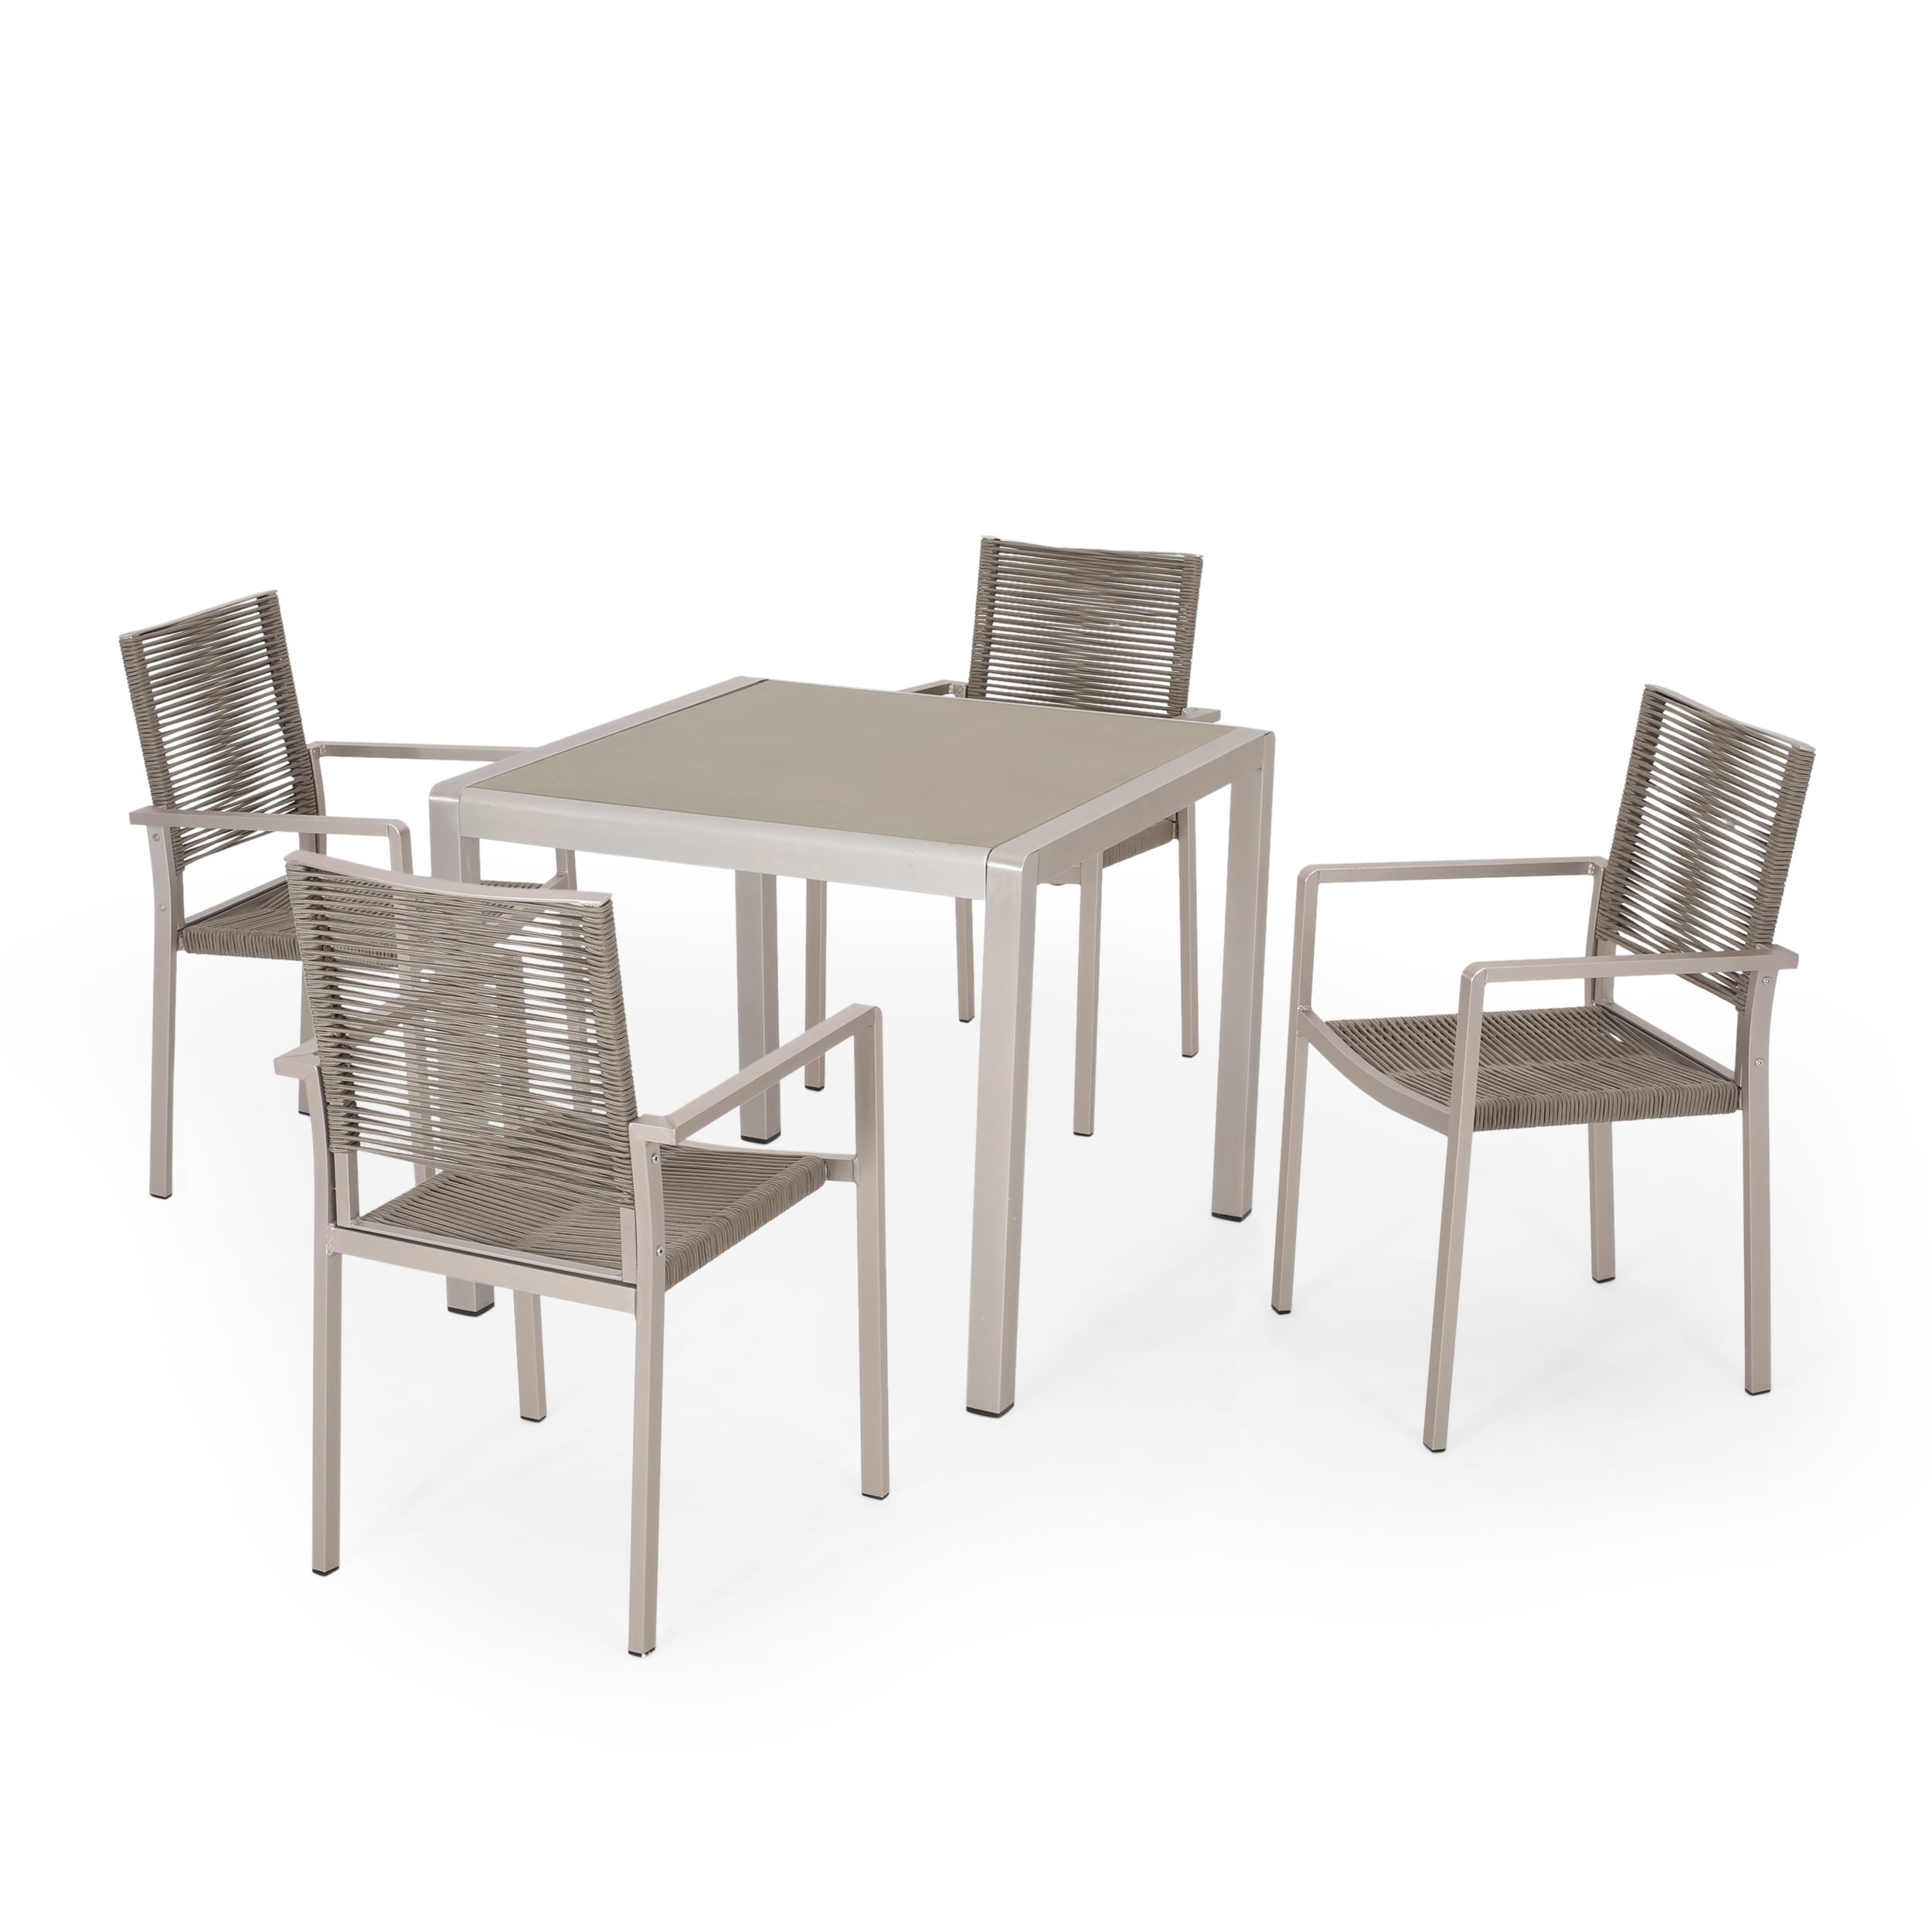 Peridot Outdoor Modern 4 Seater Aluminum Dining Set With Tempered Glass Table Top By Christopher Knight Home